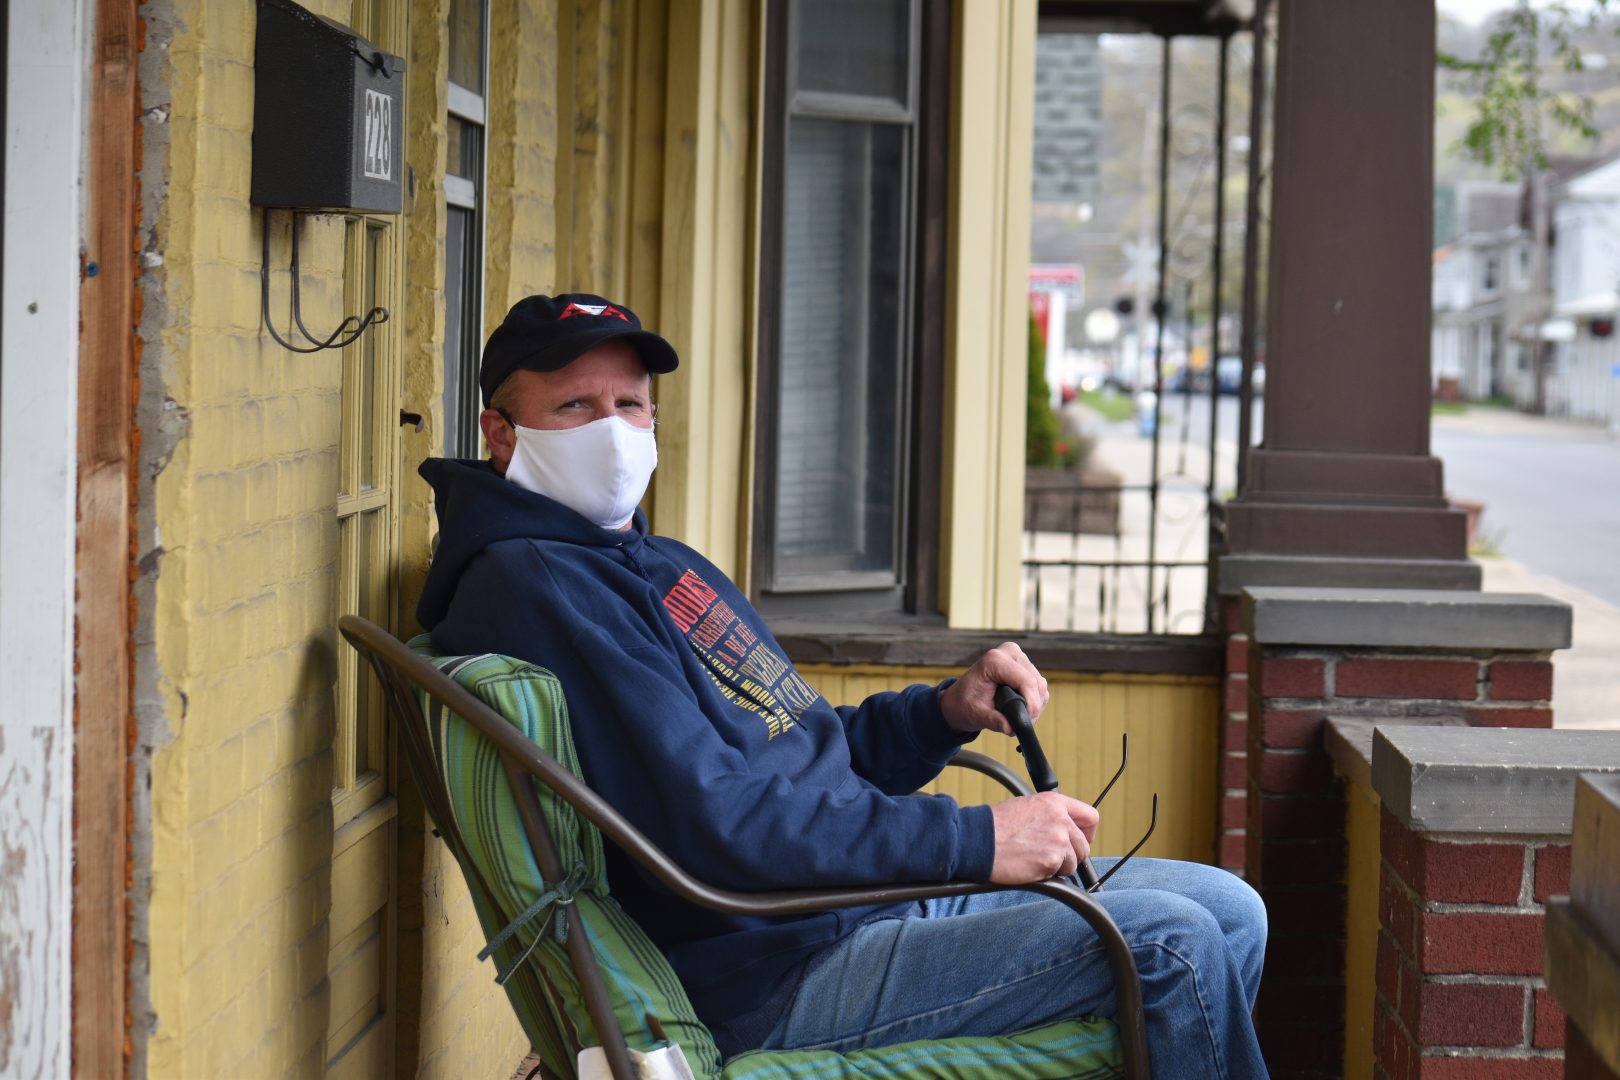 Scott Hoffman sits on his porch in Sunbury, Northumberland County, on April 29, 2020.